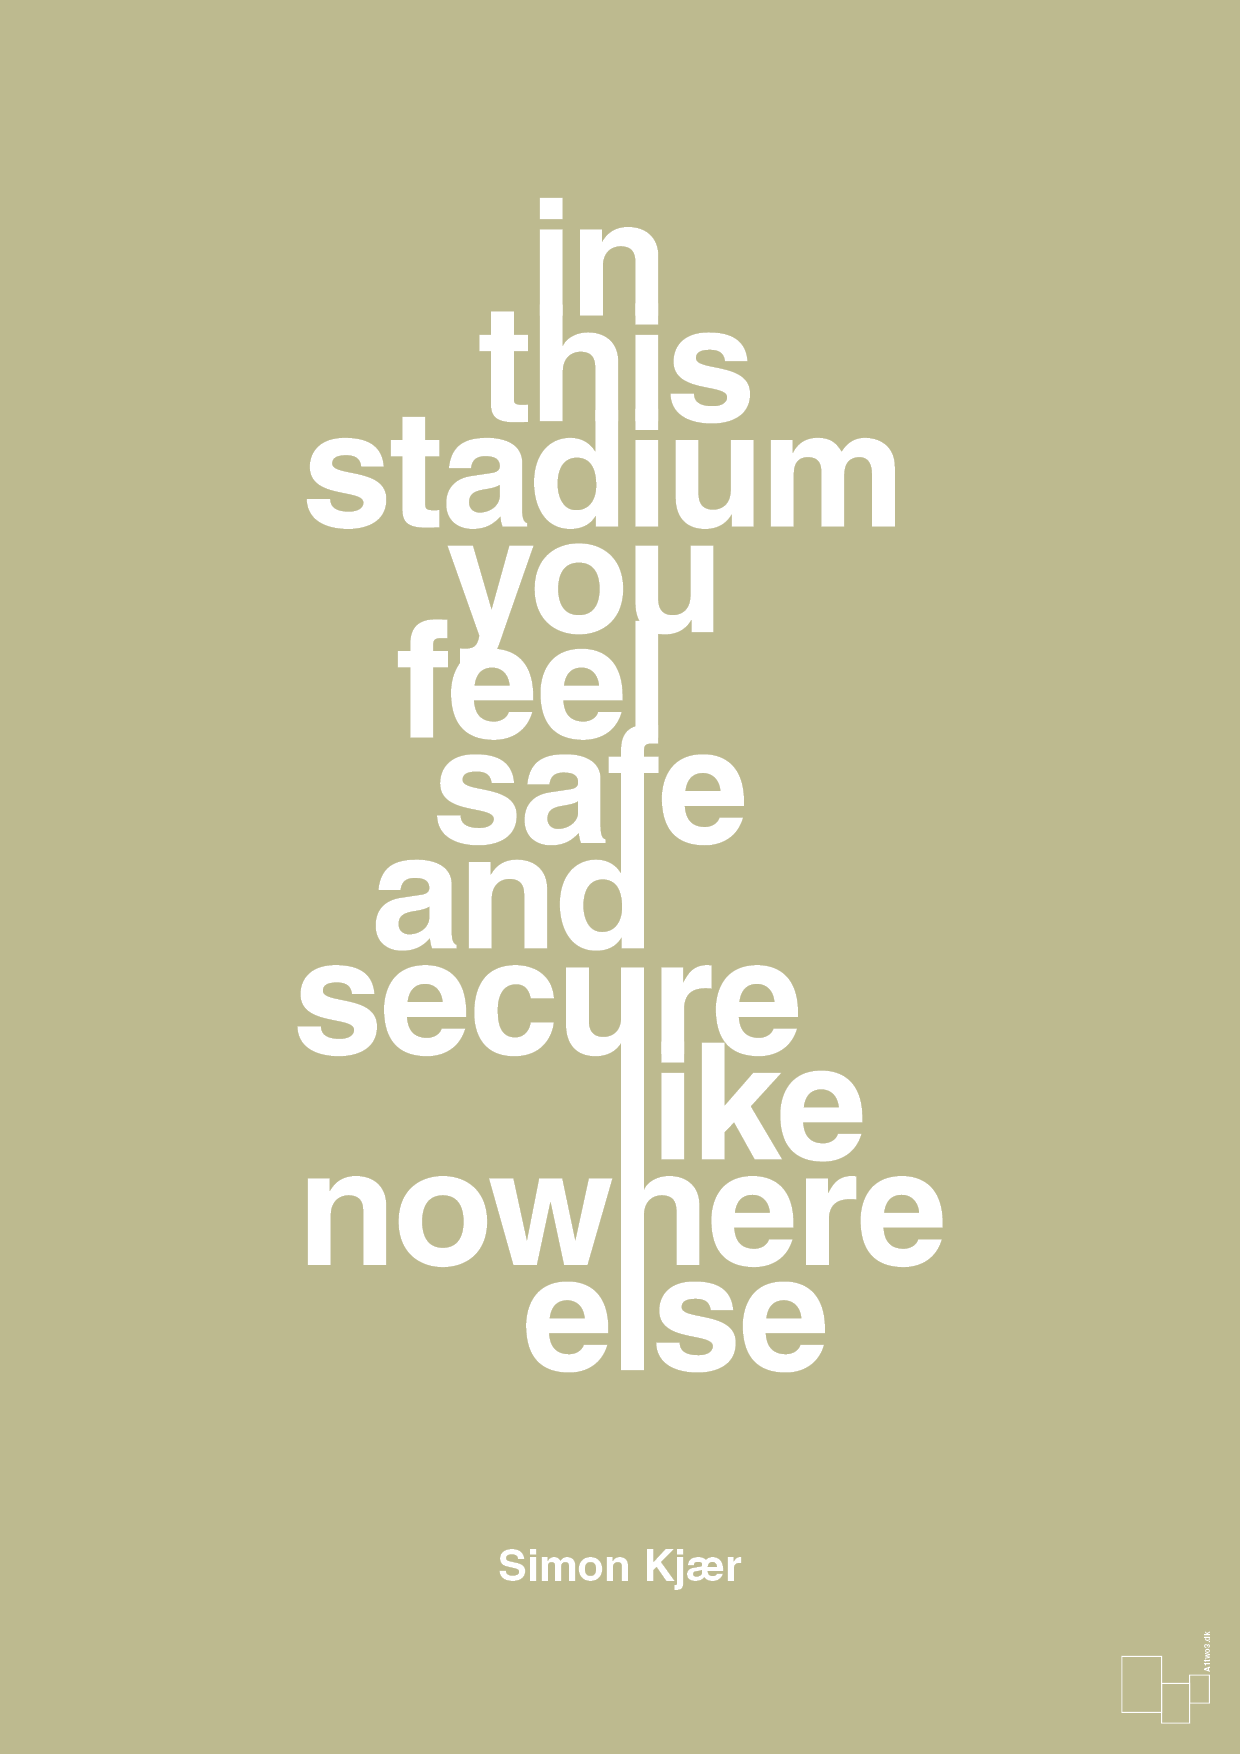 in this stadium you feel safe and secure like nowhere else - Plakat med Citater i Back to Nature